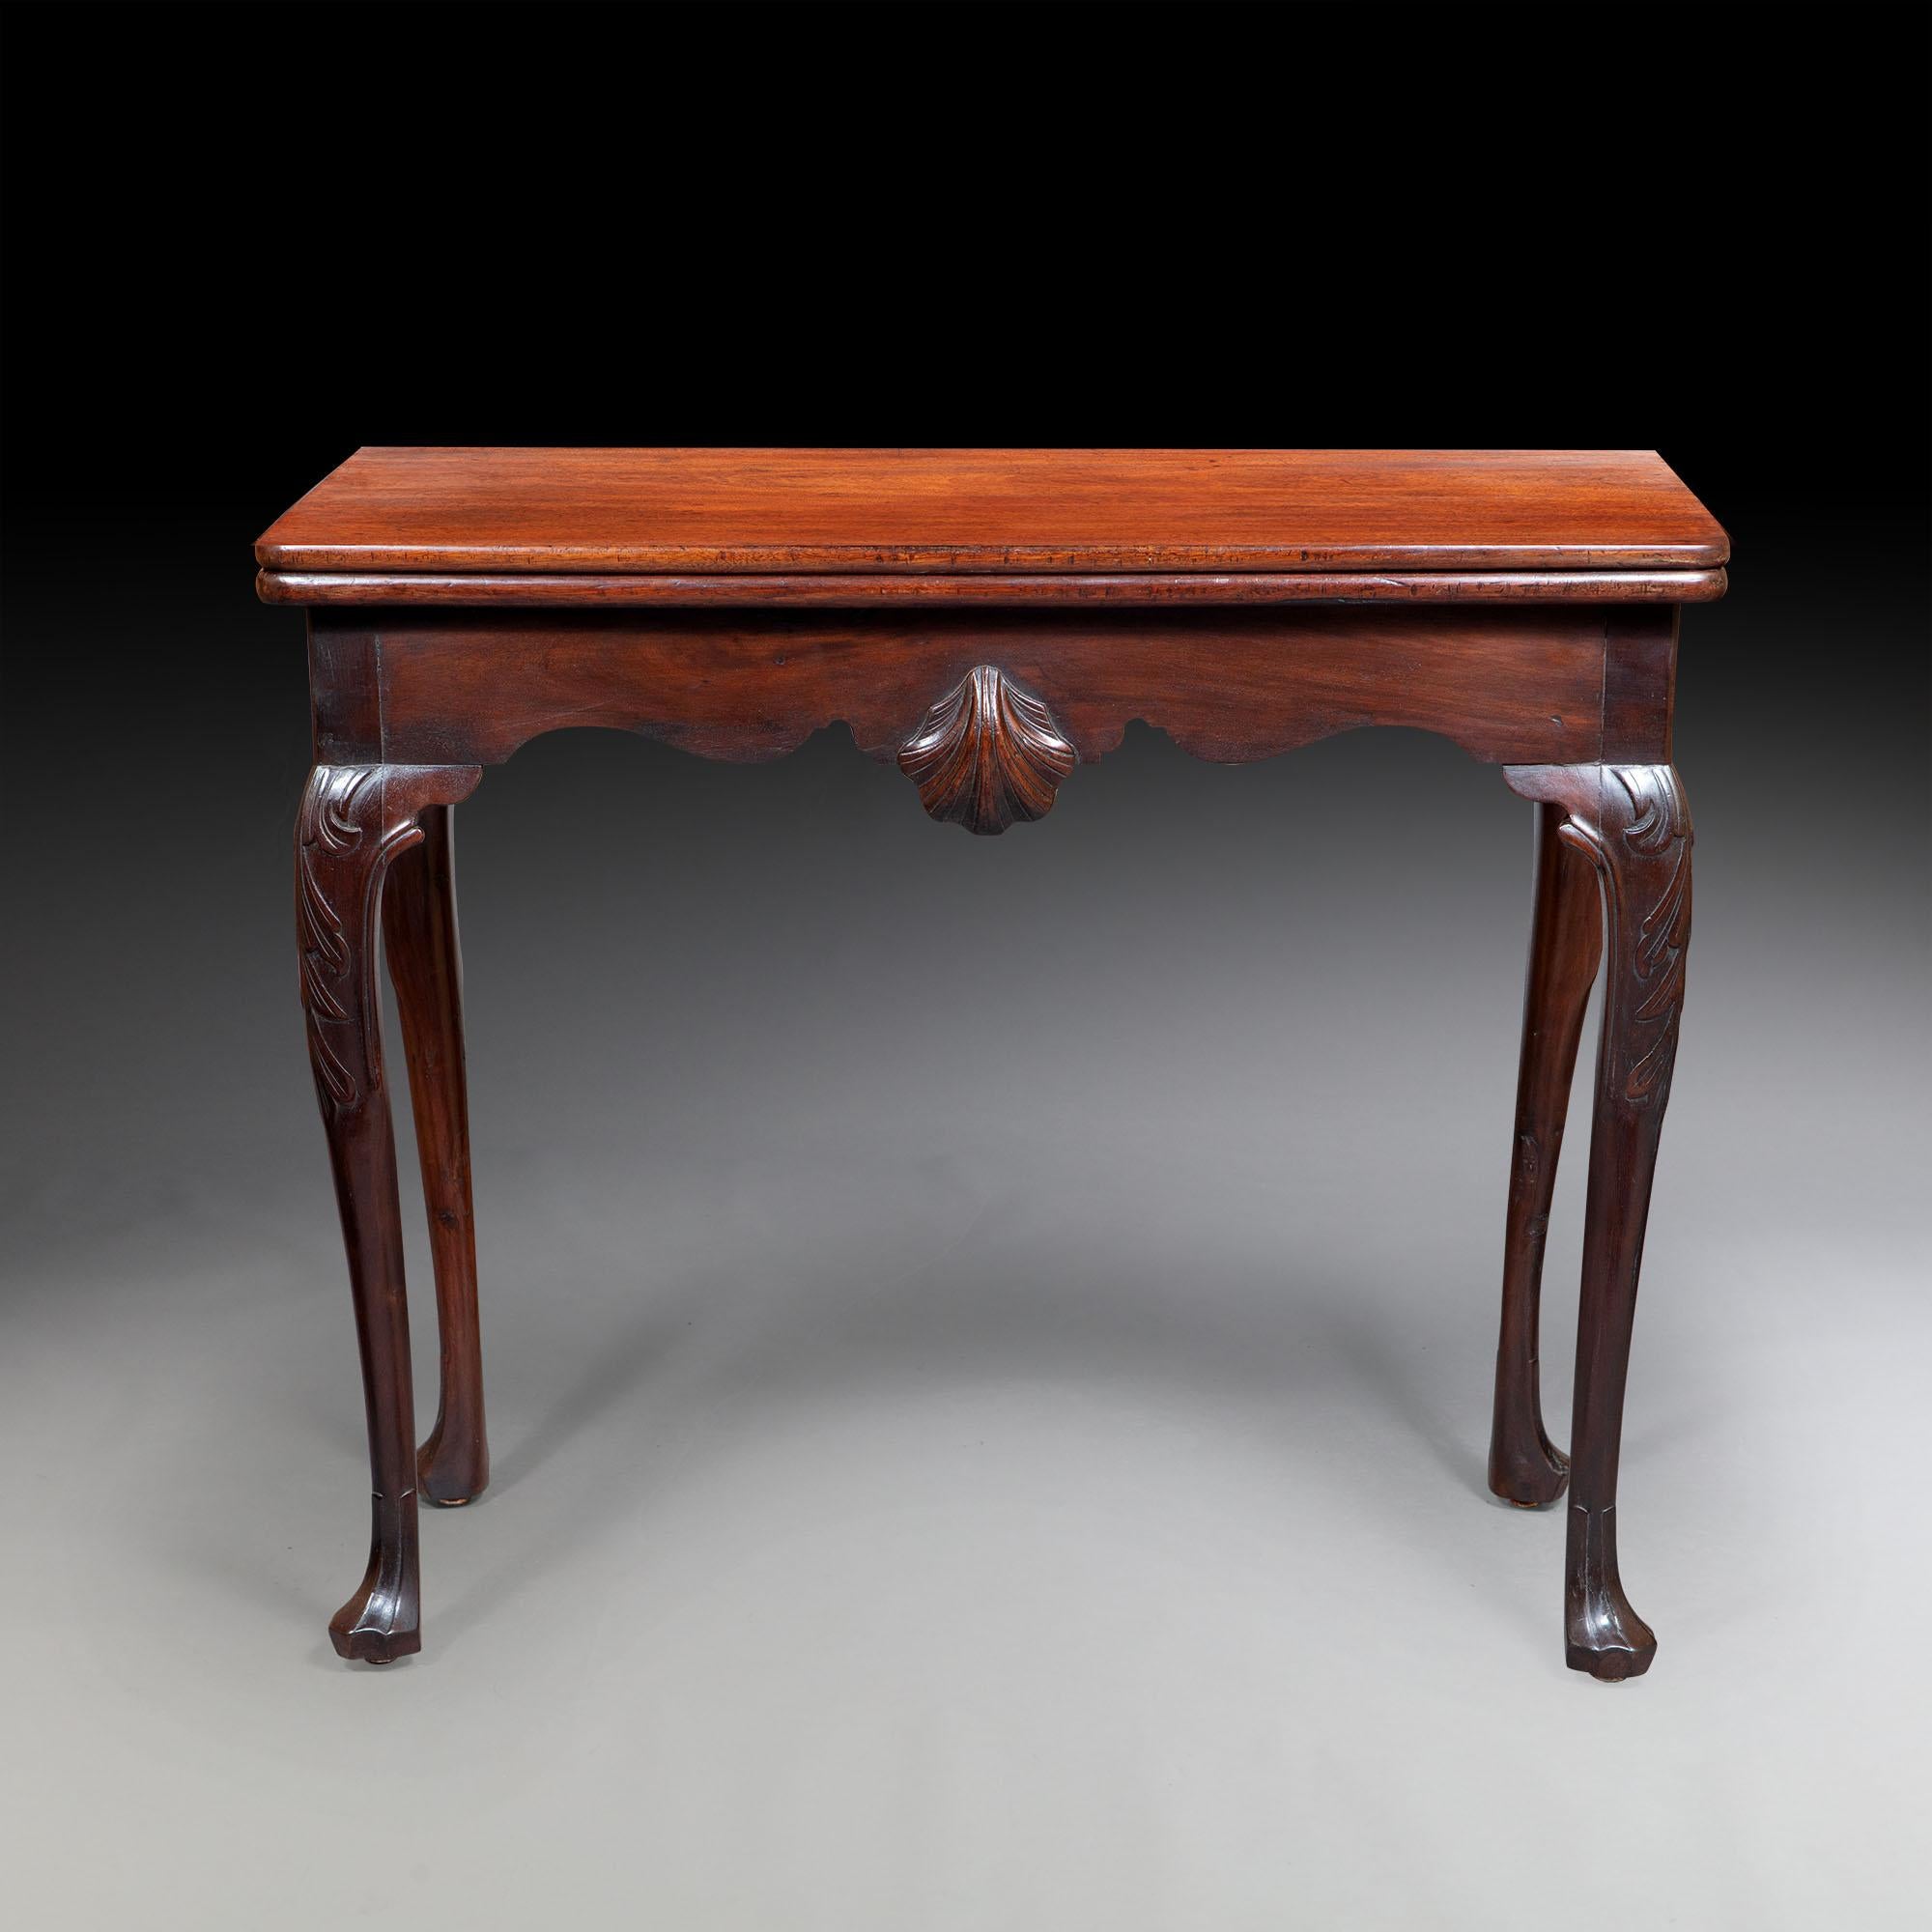 A fine pair of 18th century Irish brown mahogany tea tables. The rectangular tops above a shaped frieze, with a central scallop shell, resting on shell carved cabriole legs with lions paw feet.
Irish, circa 1760.

 